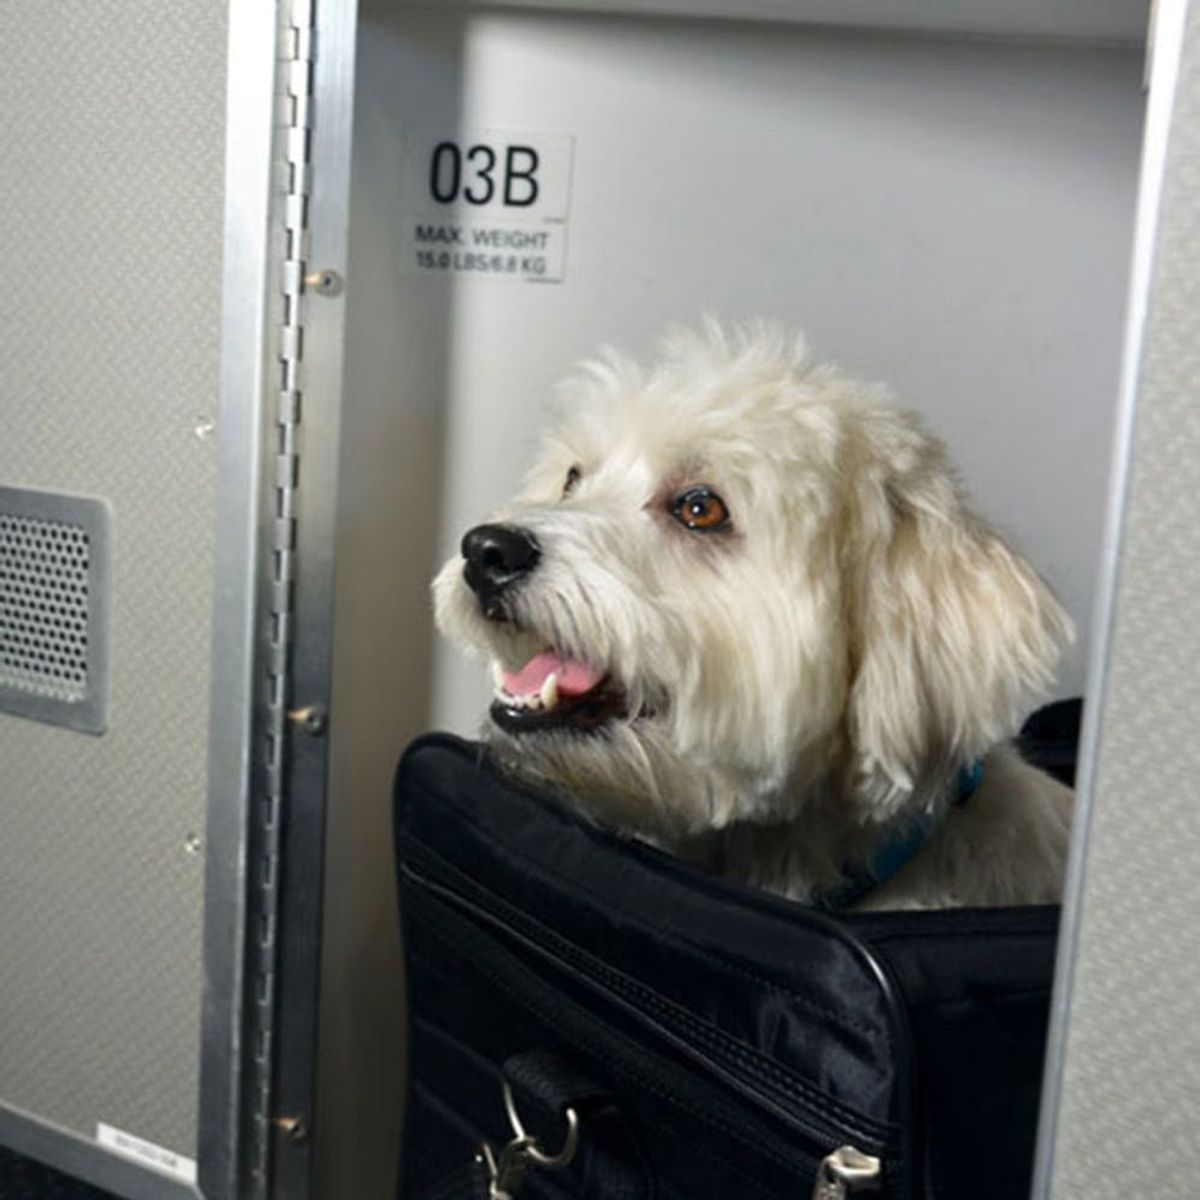 Your Pet Can Now Travel Better Than You on This Airline